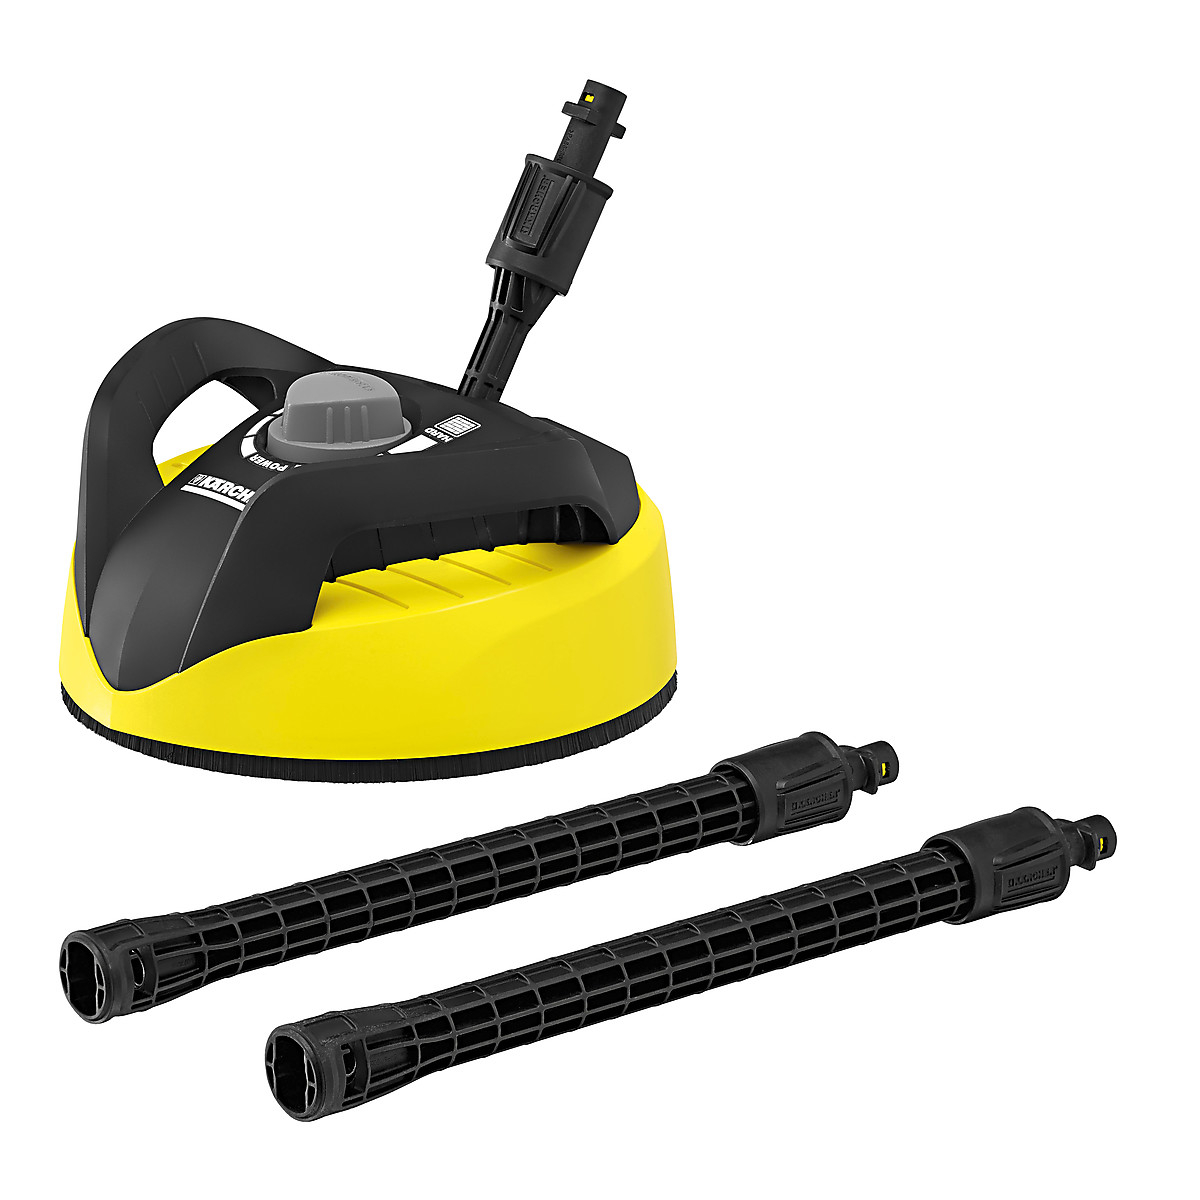 Karcher T 350 Patio Cleaner Clas Ohlson intended for measurements 1200 X 1200